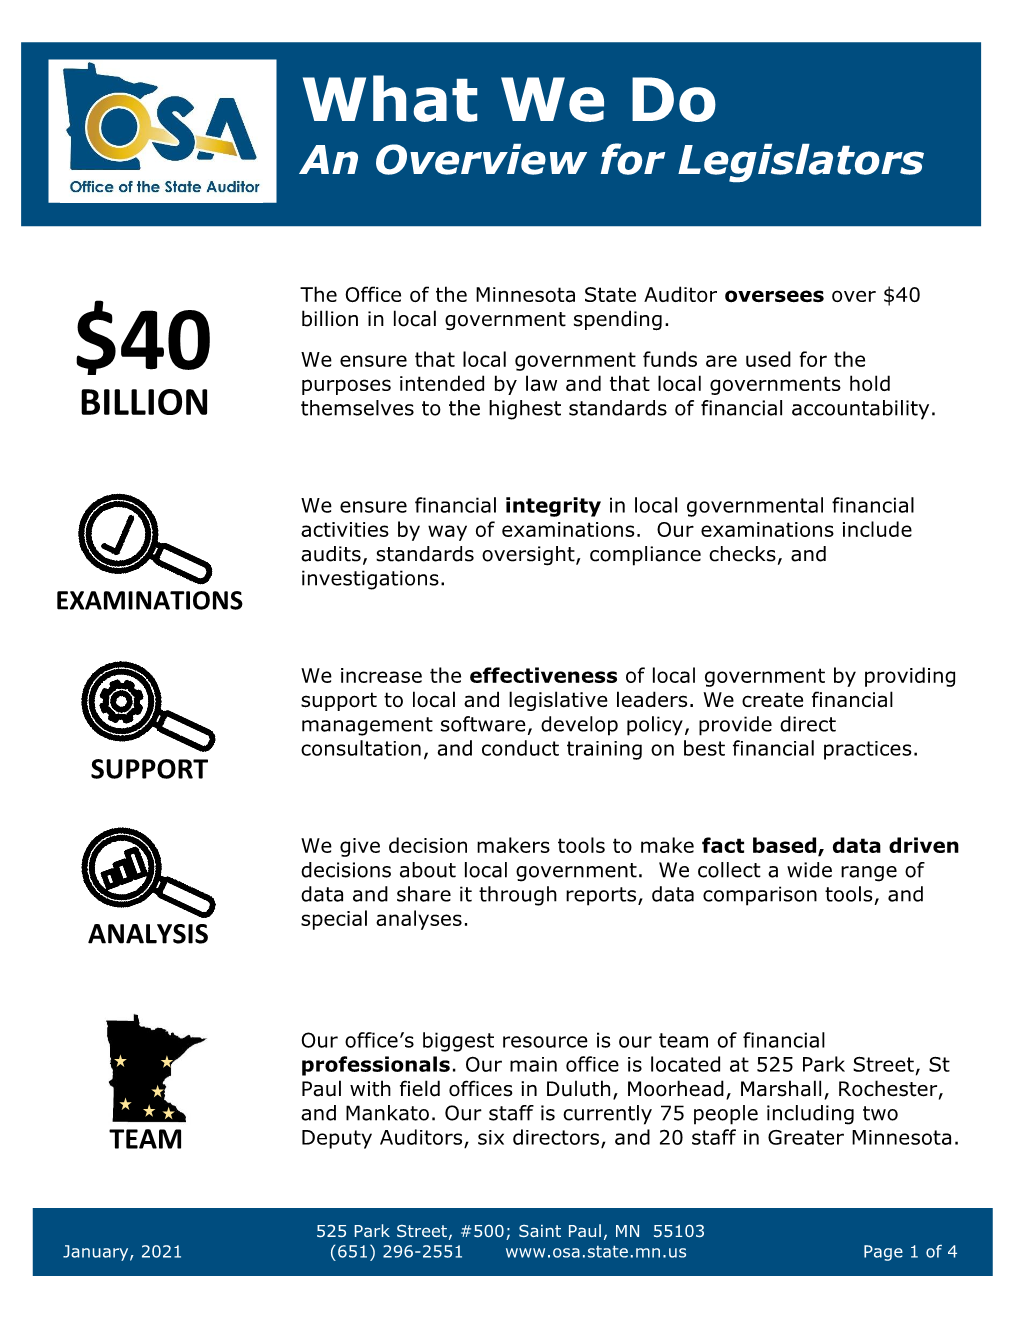 What We Do an Overview for Legislators